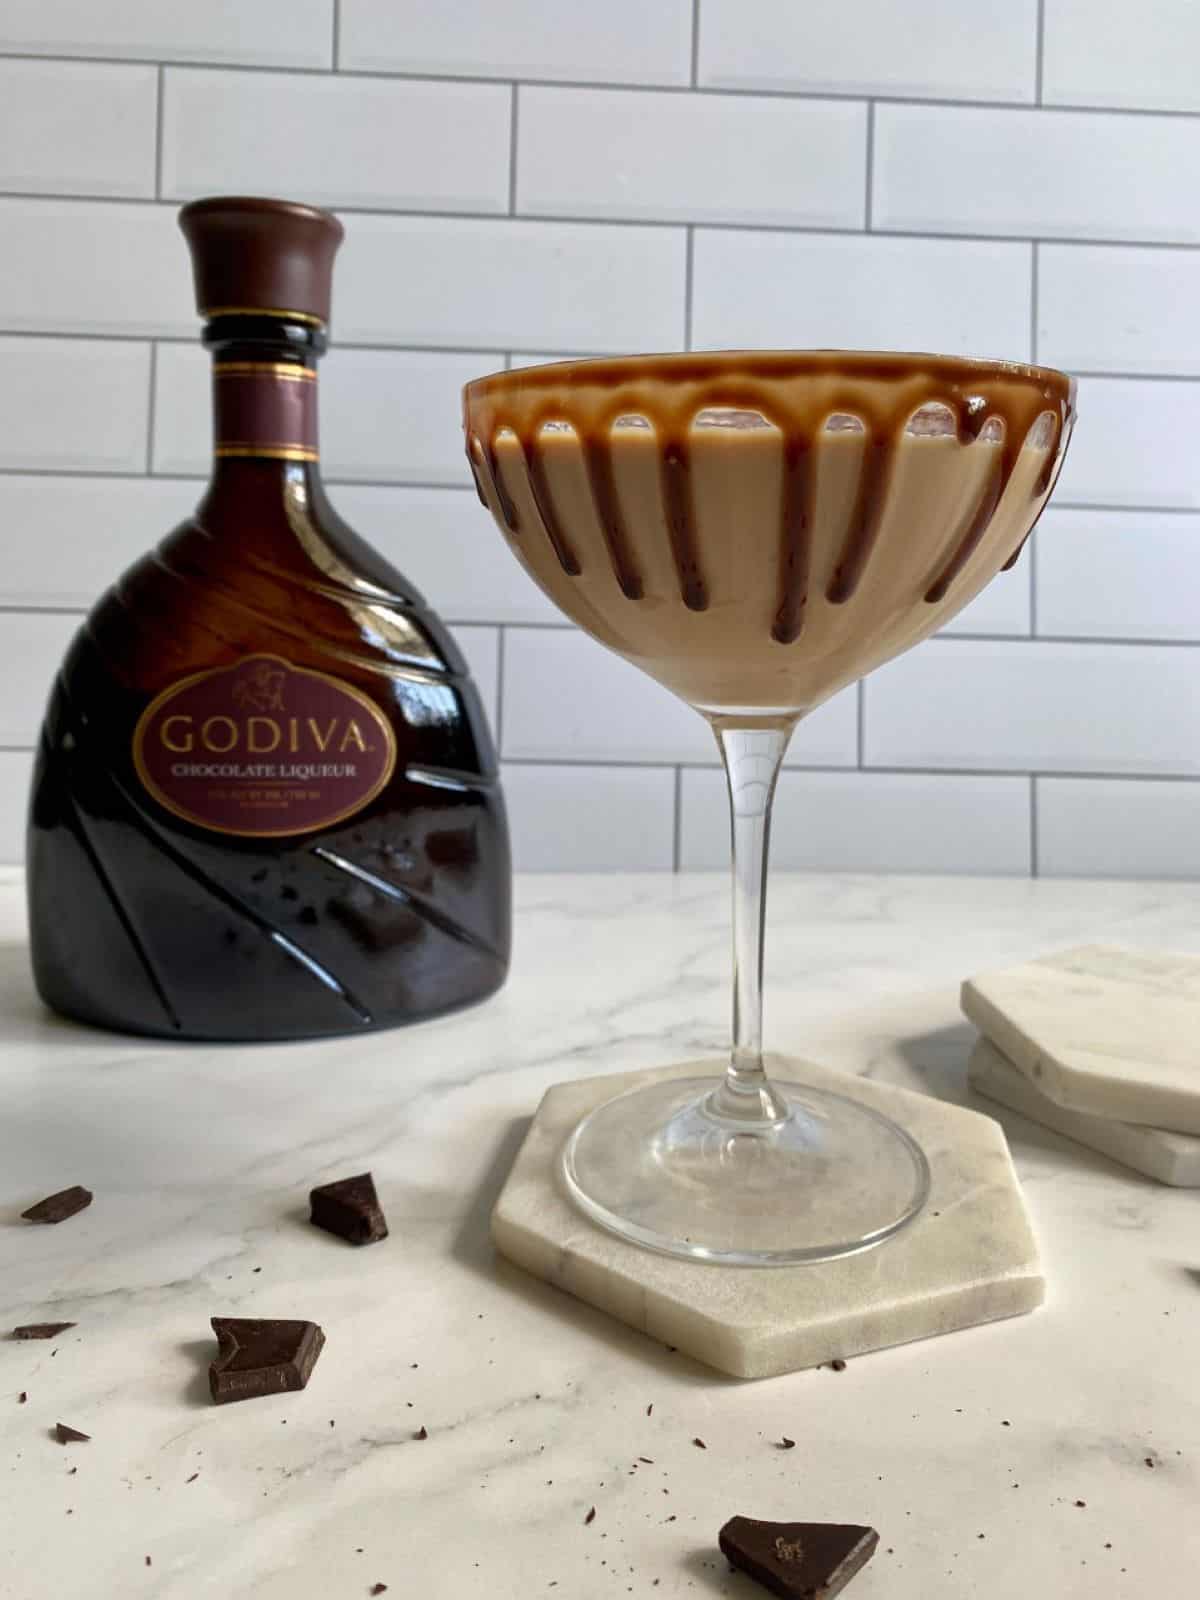 Chocolate Martini with Godiva chocolate liqueur drink sitting on a coaster with the Godiva bottle in the background.